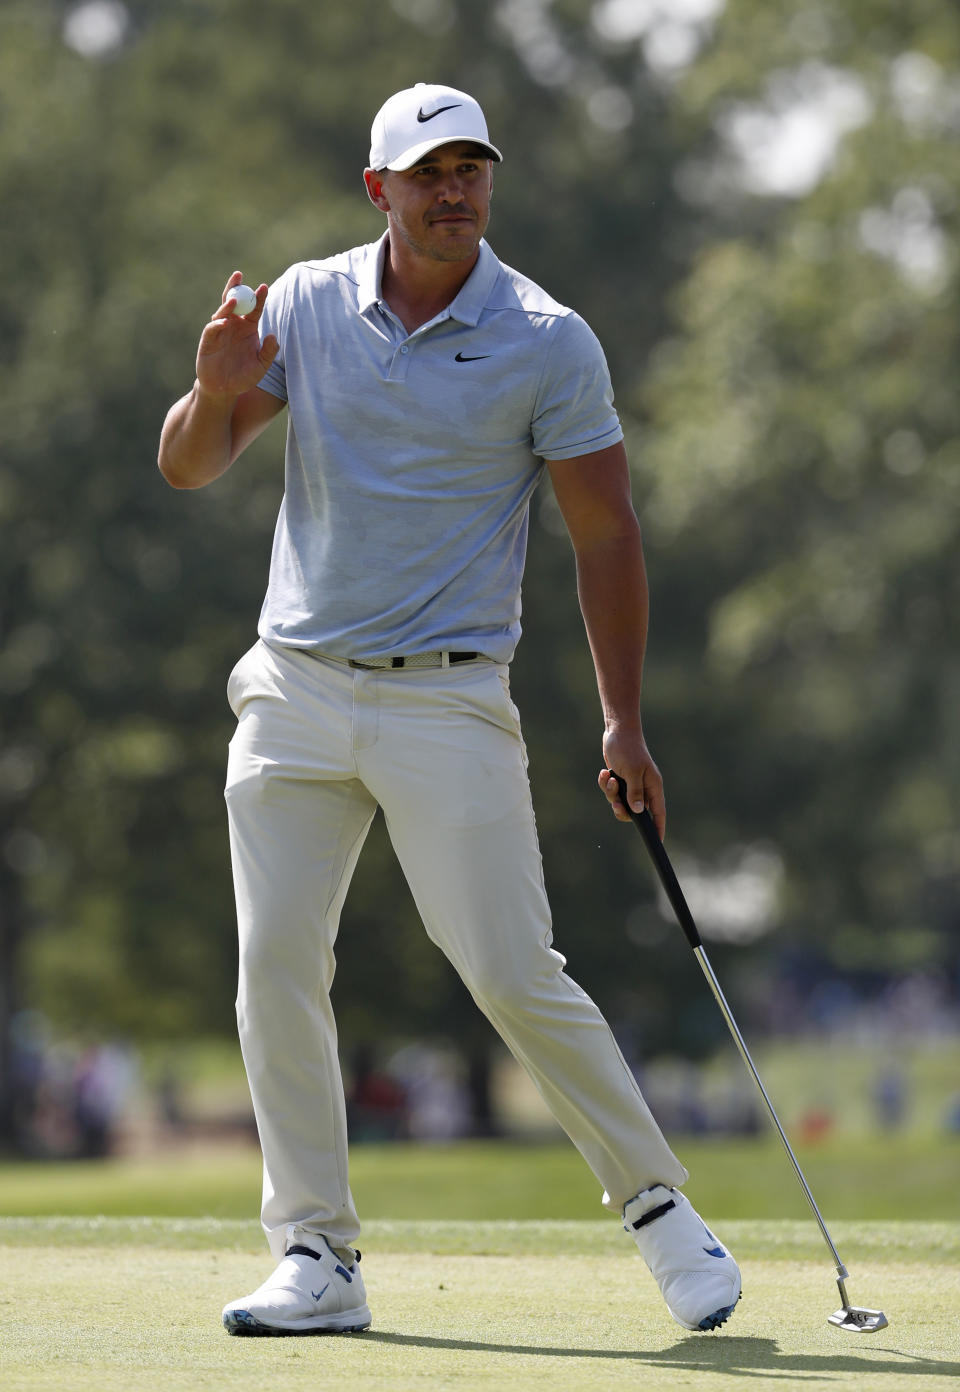 Brooks Koepka reacts after making a birdie on the eighth hole during the third round of the PGA Championship golf tournament at Bellerive Country Club, Saturday, Aug. 11, 2018, in St. Louis. (AP Photo/Jeff Roberson)